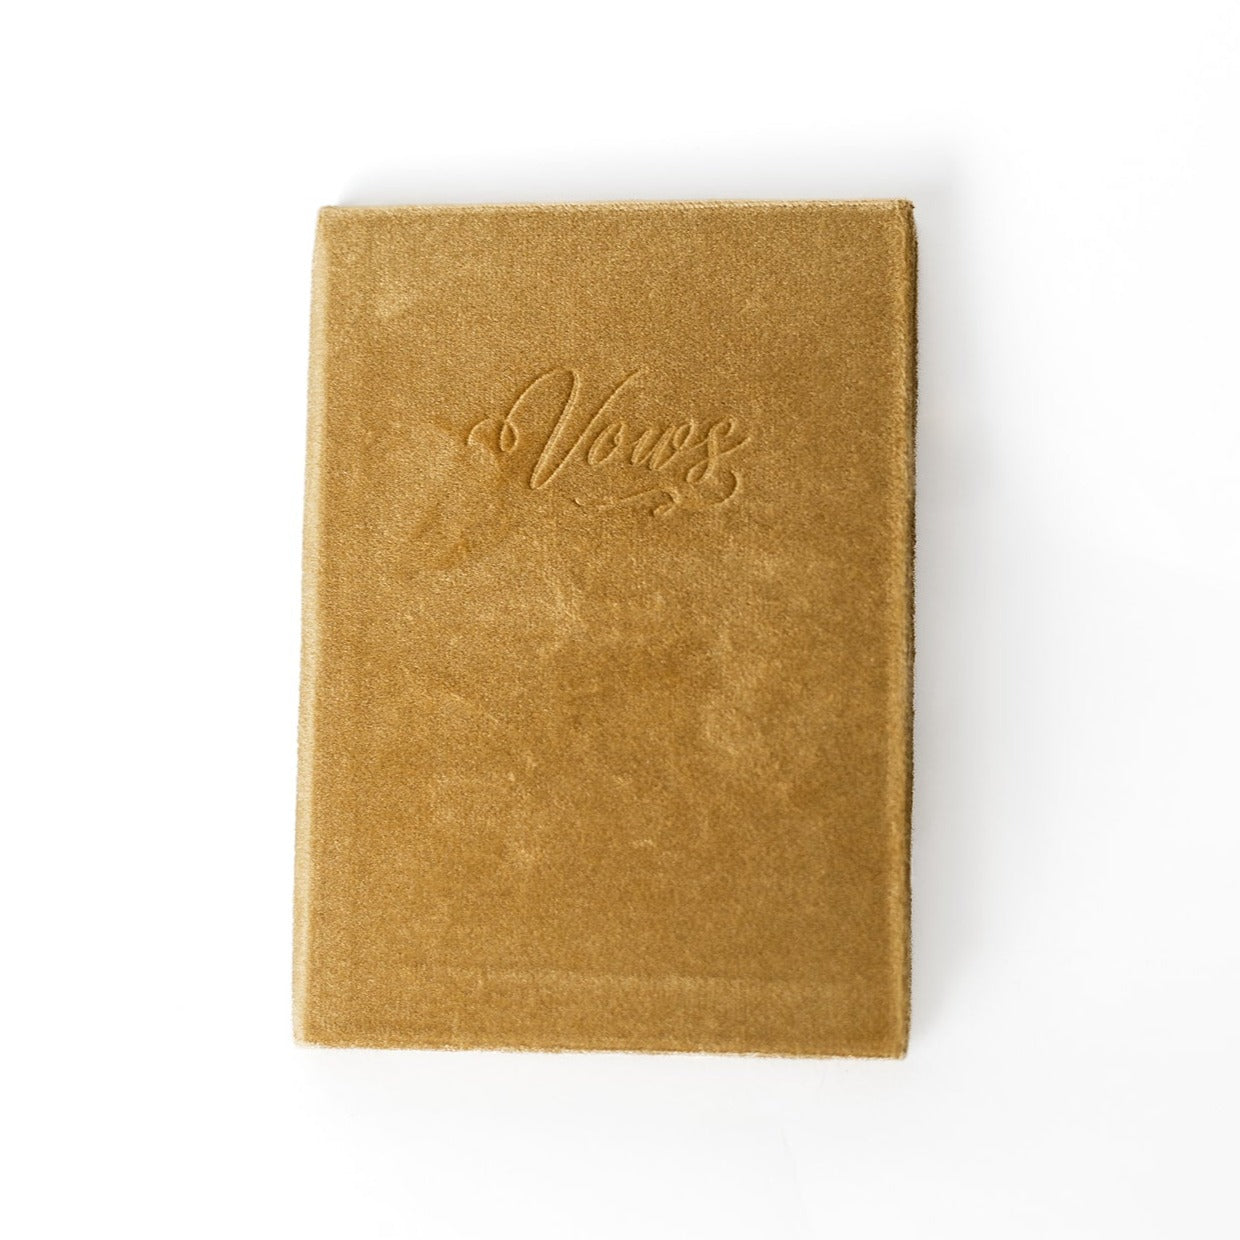 A mustard-coloured vow book with the word "Vows" embossed on the front cover.